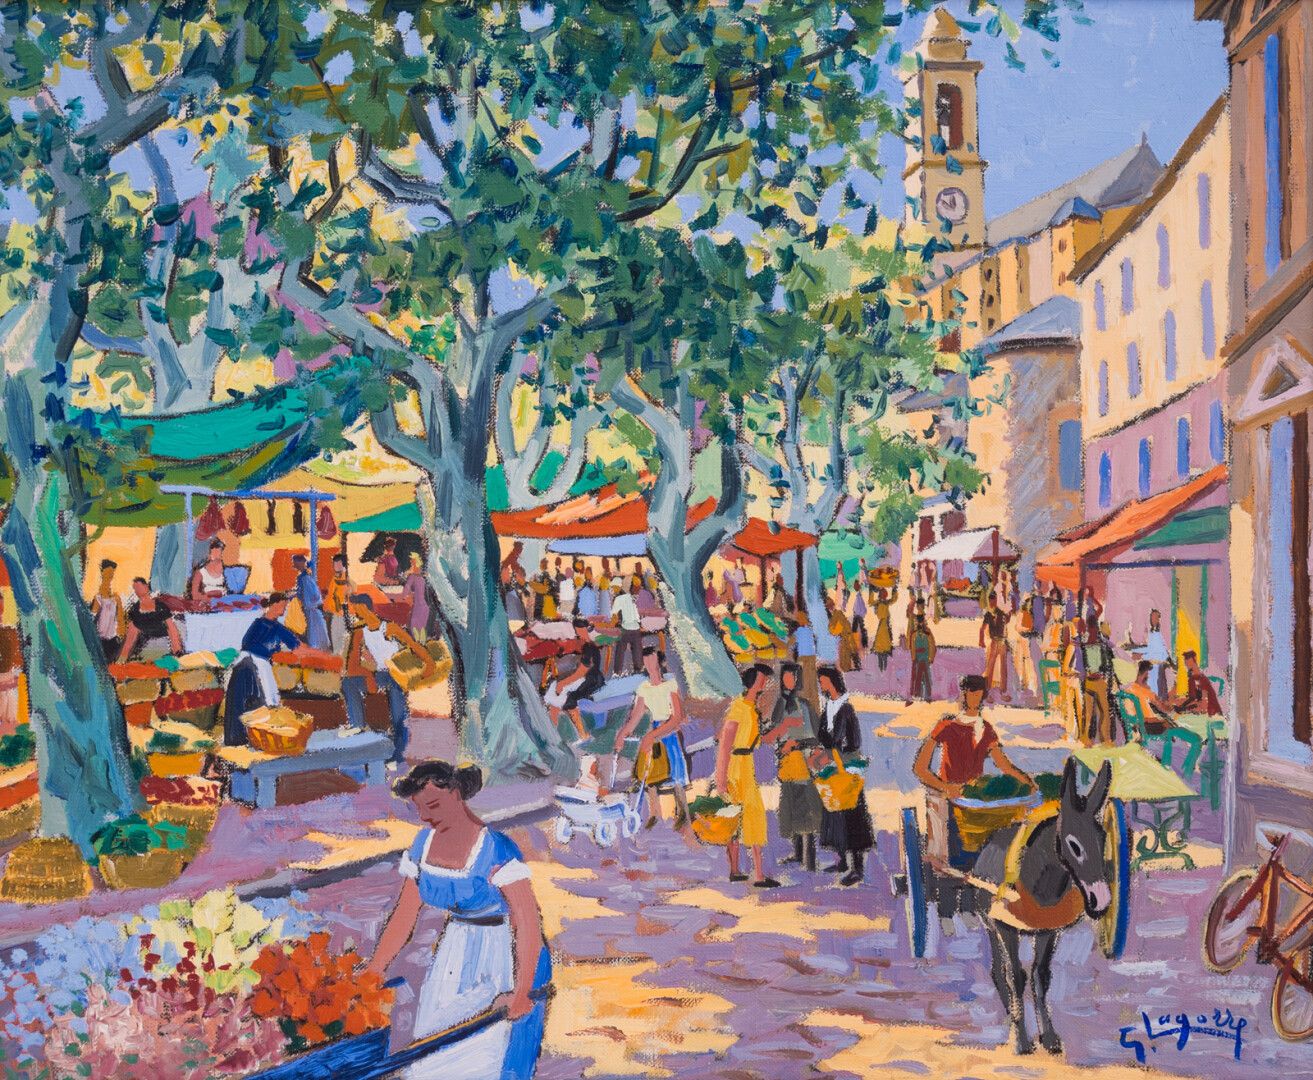 Null René Gaston LAGORRE (1913-2004)

The market

Oil on canvas, signed lower ri&hellip;